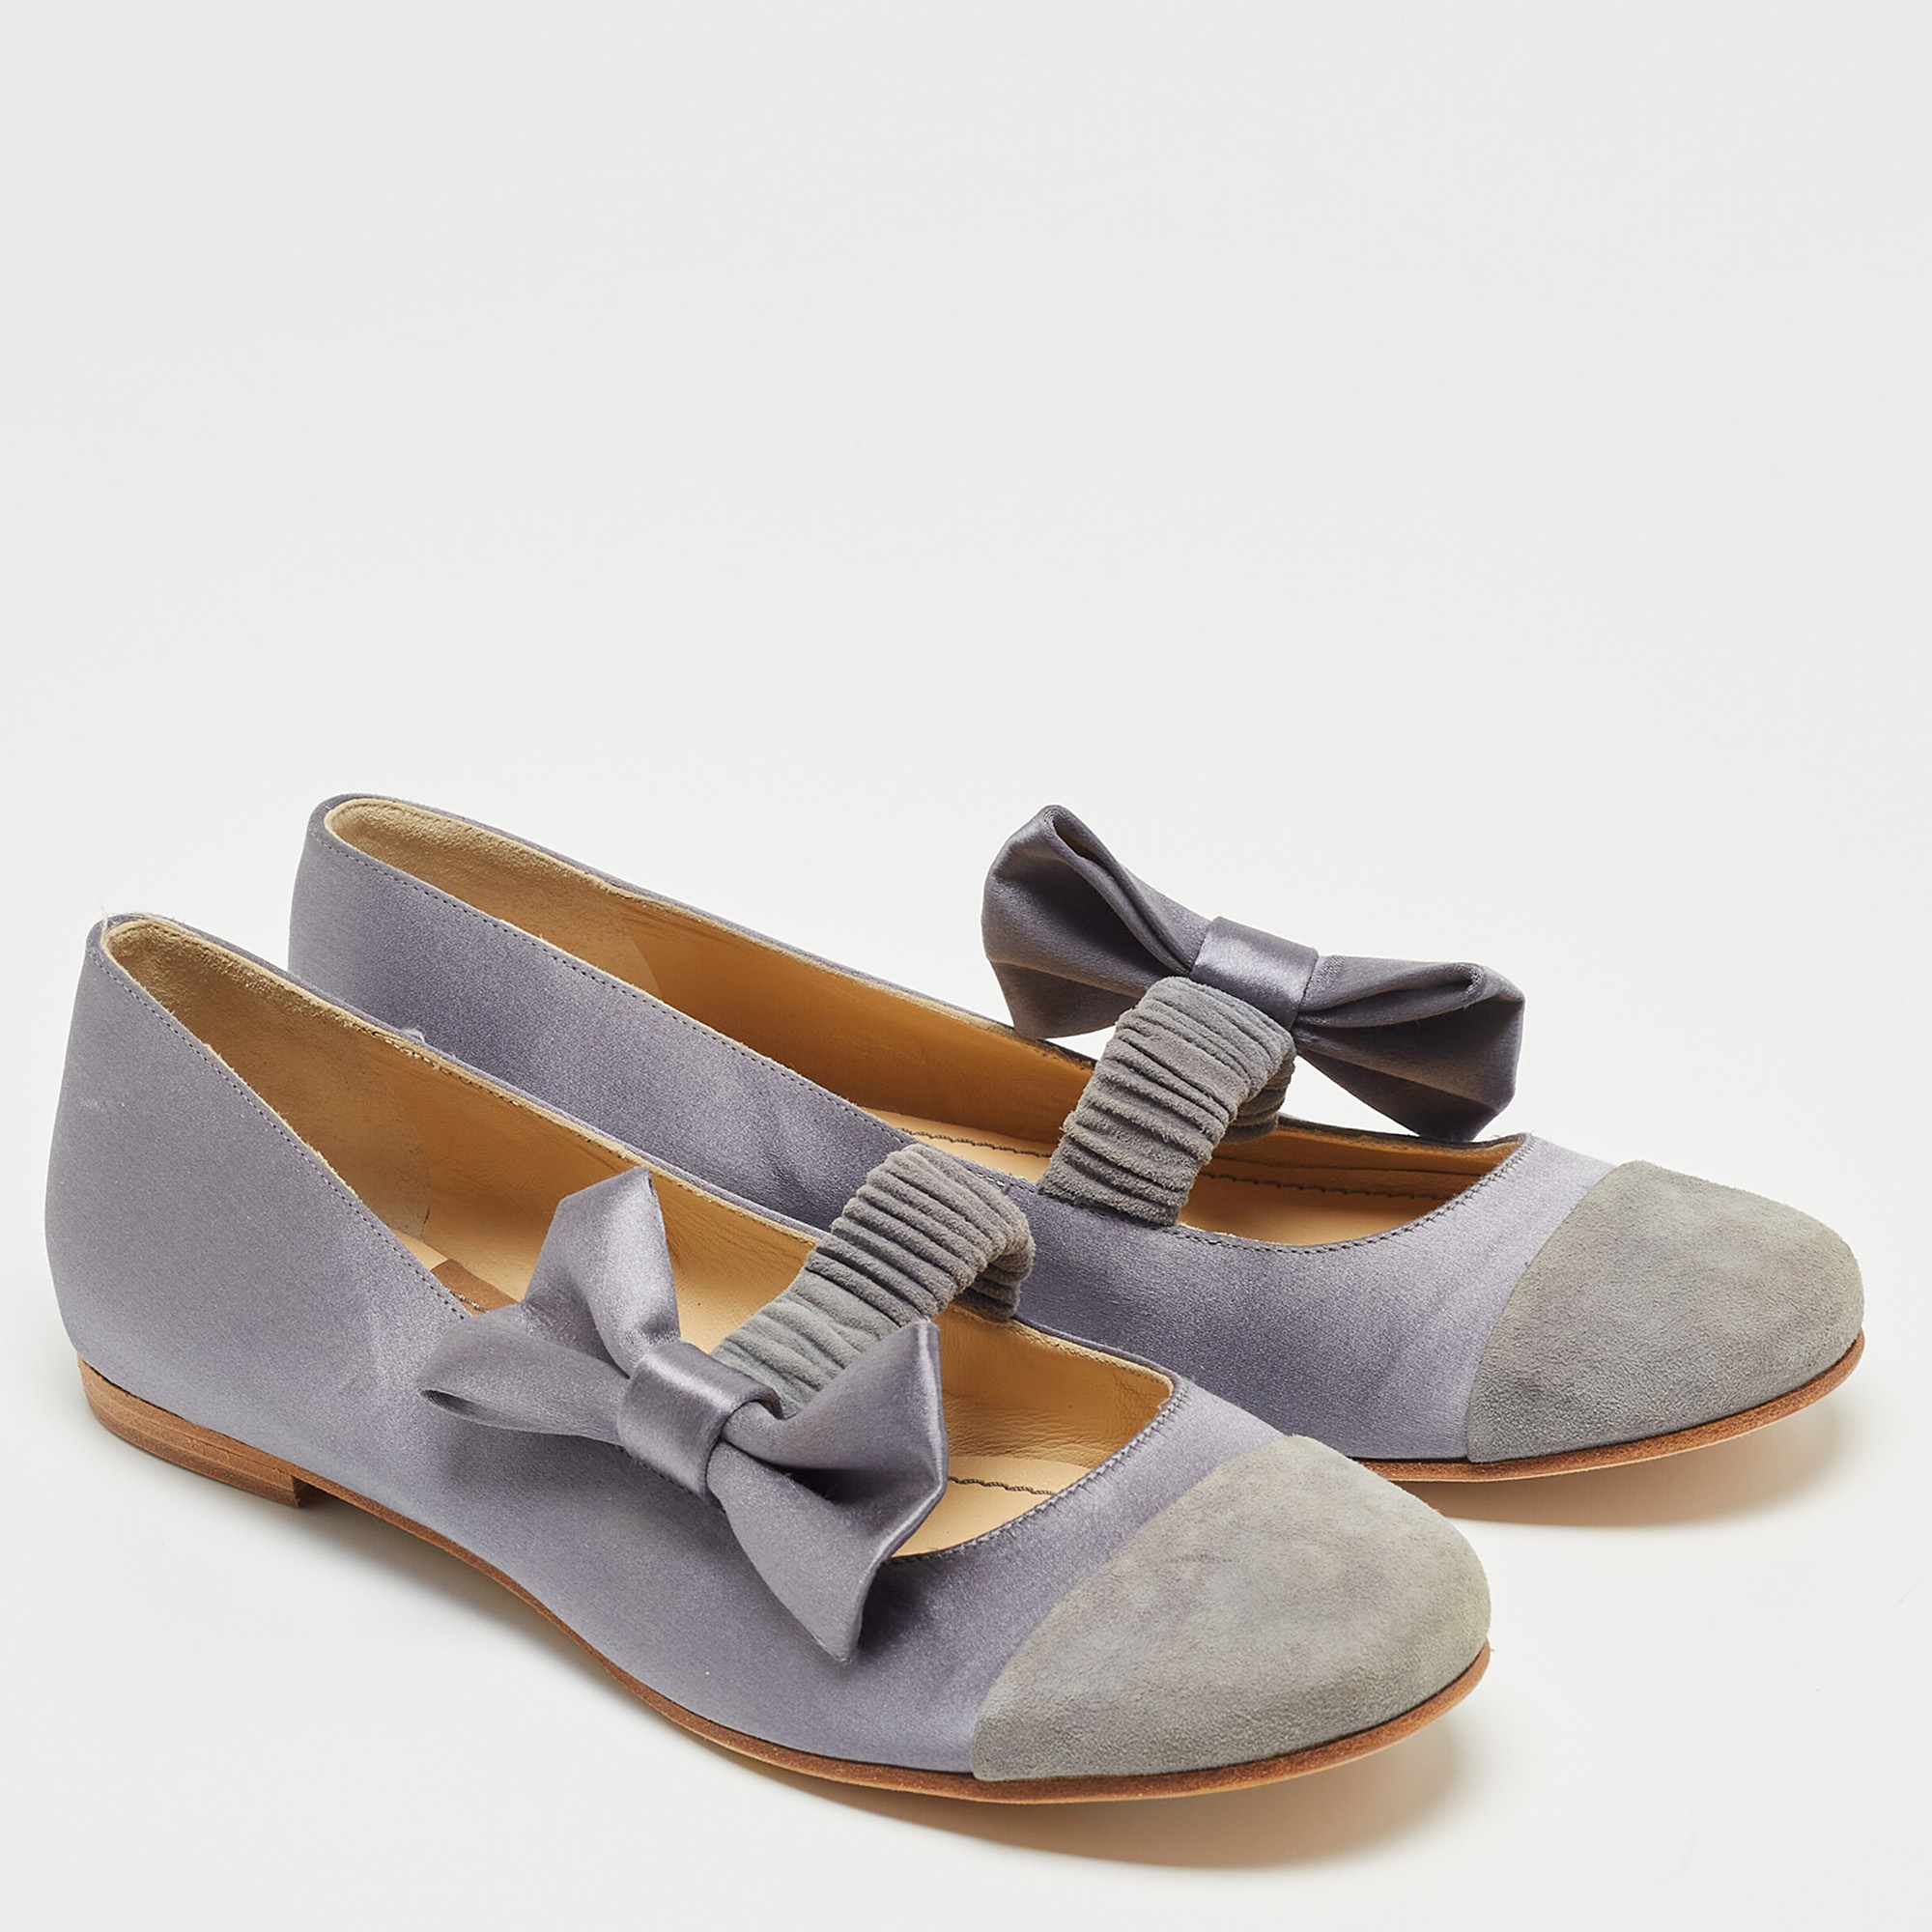 See By Chloe Grey/Blue Satin And Suede Ballet Flats Size 37